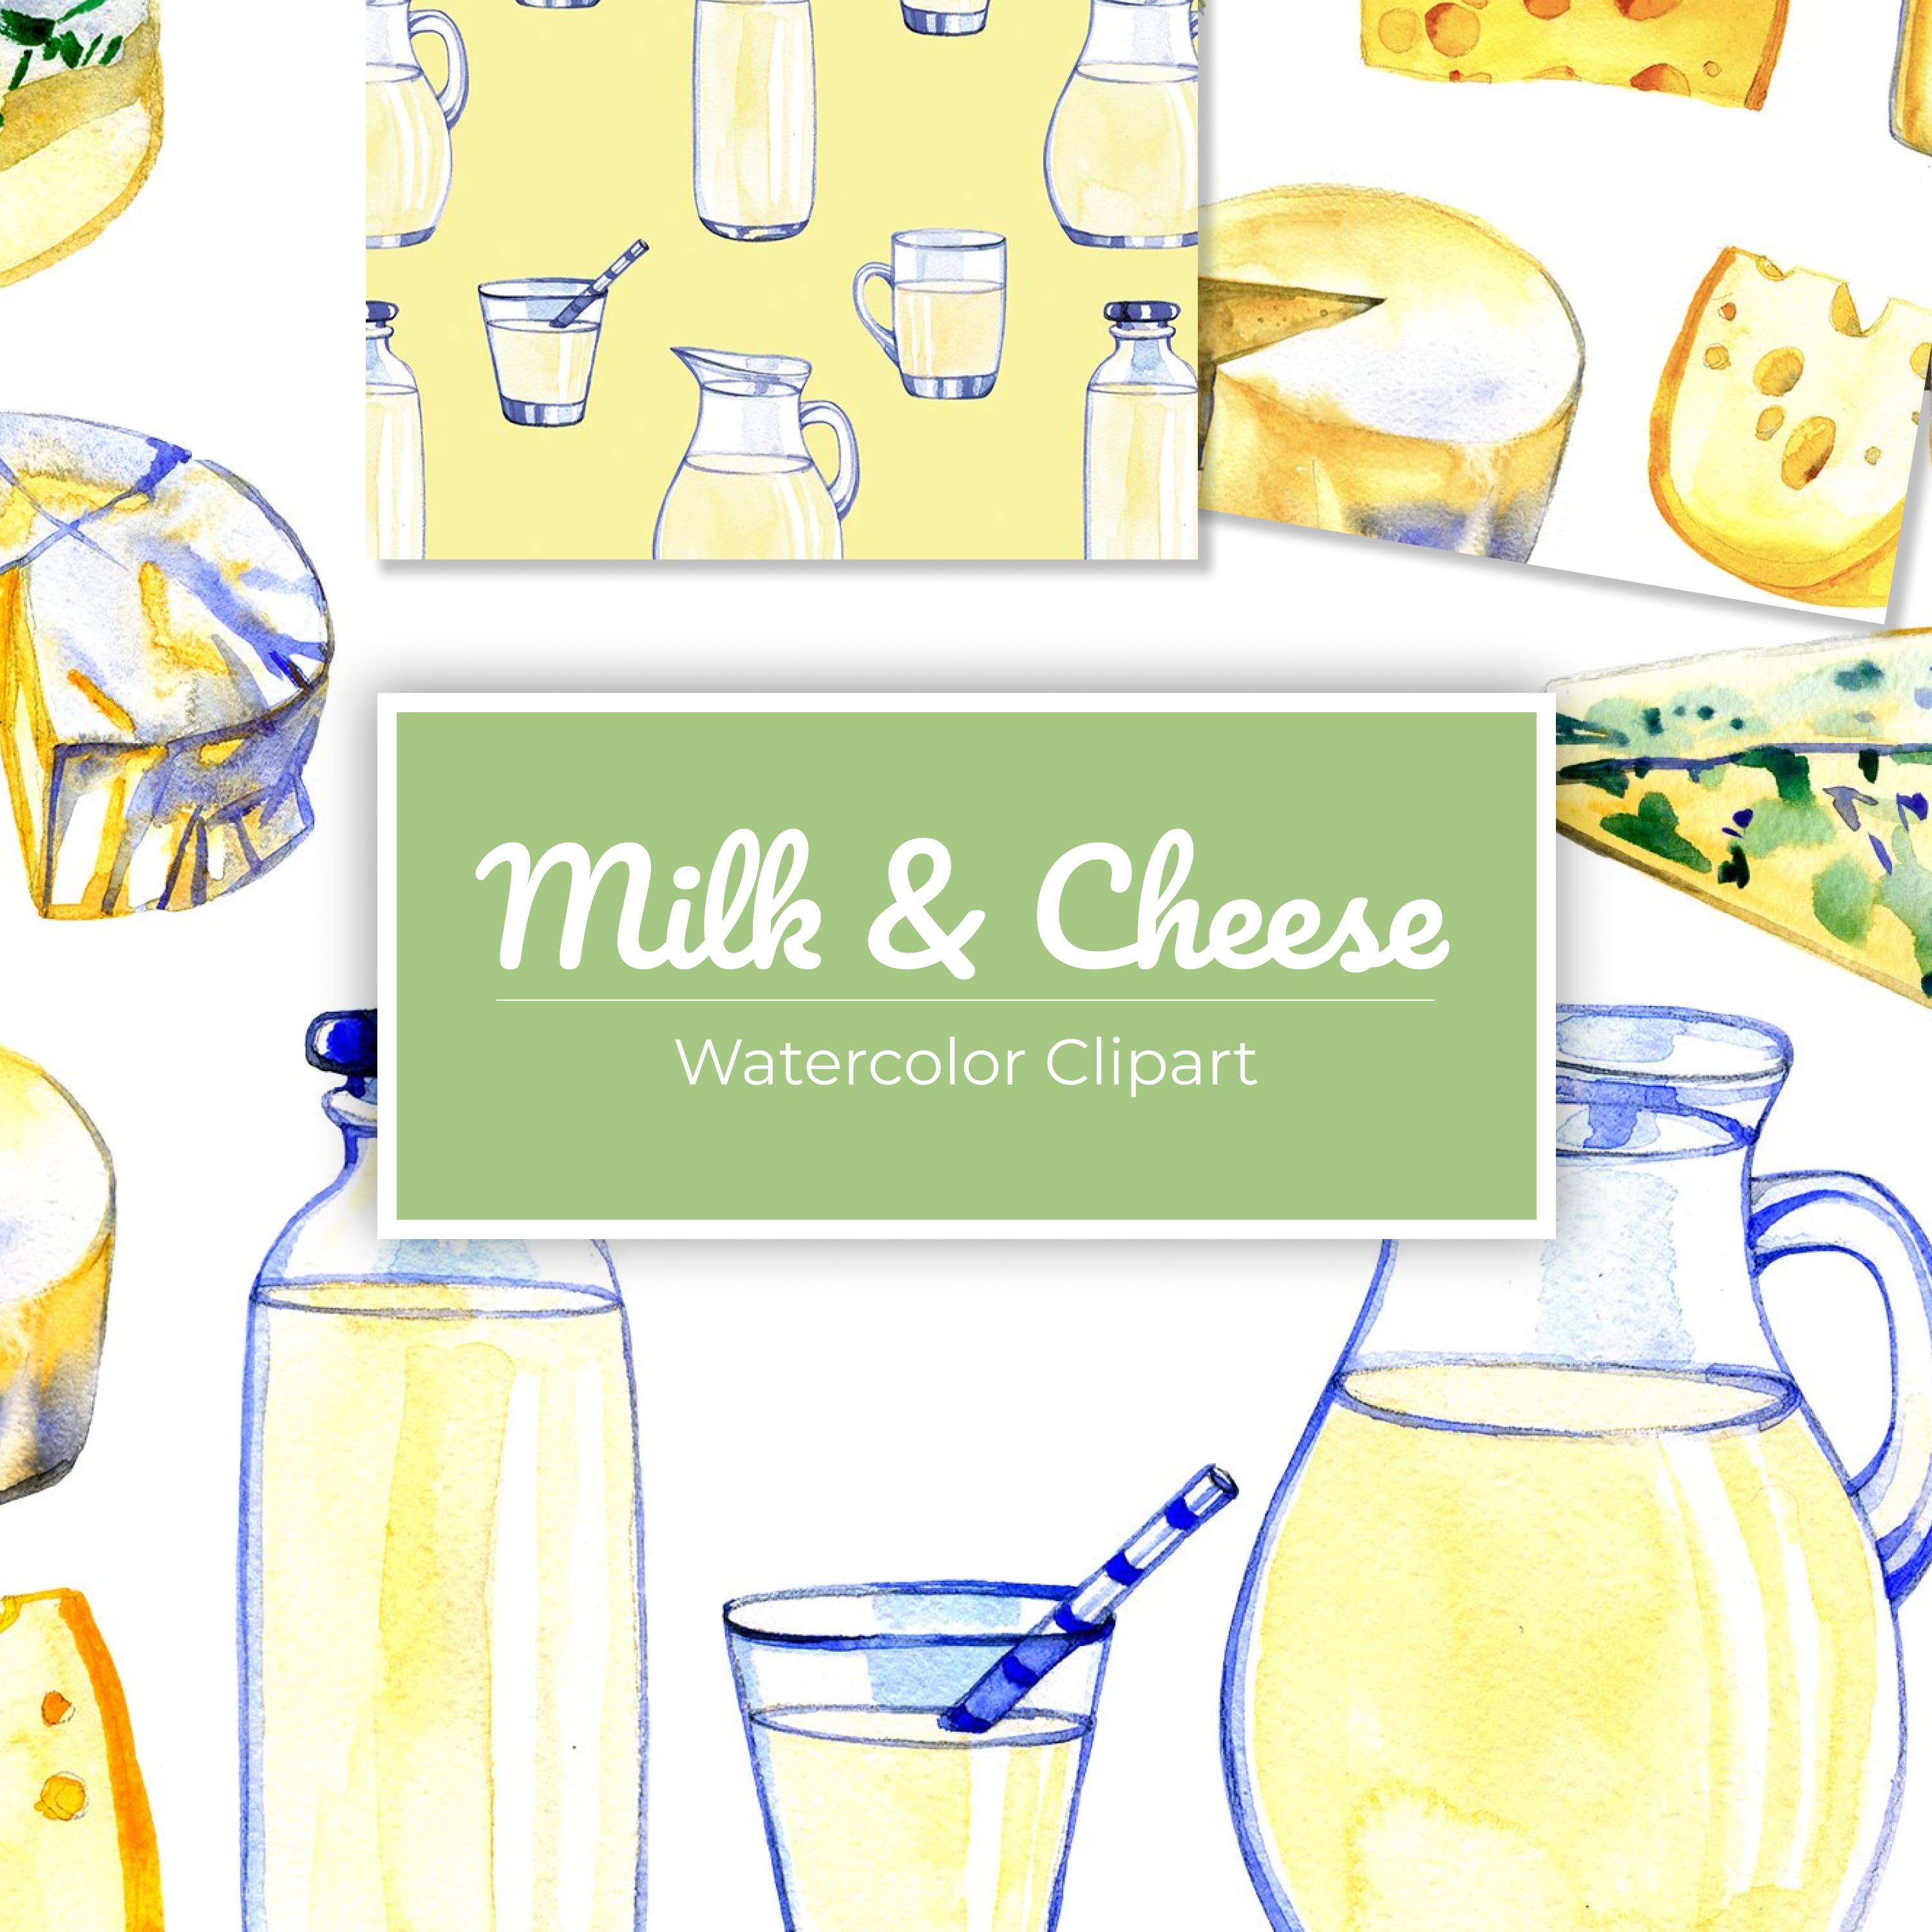 Set of colorful images of milk and hard cheese.